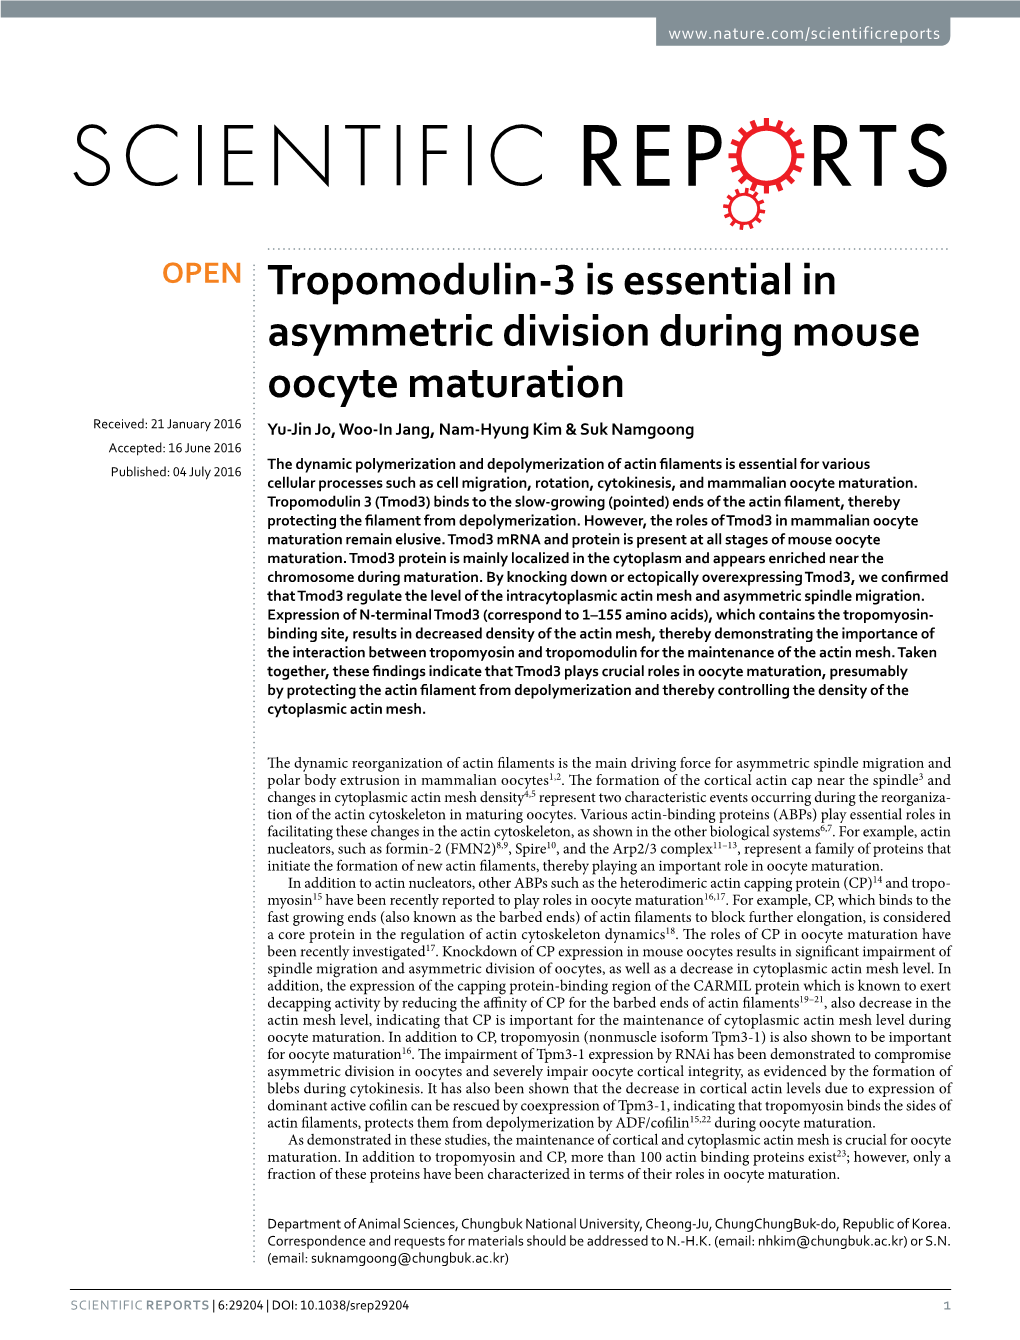 Tropomodulin-3 Is Essential in Asymmetric Division During Mouse